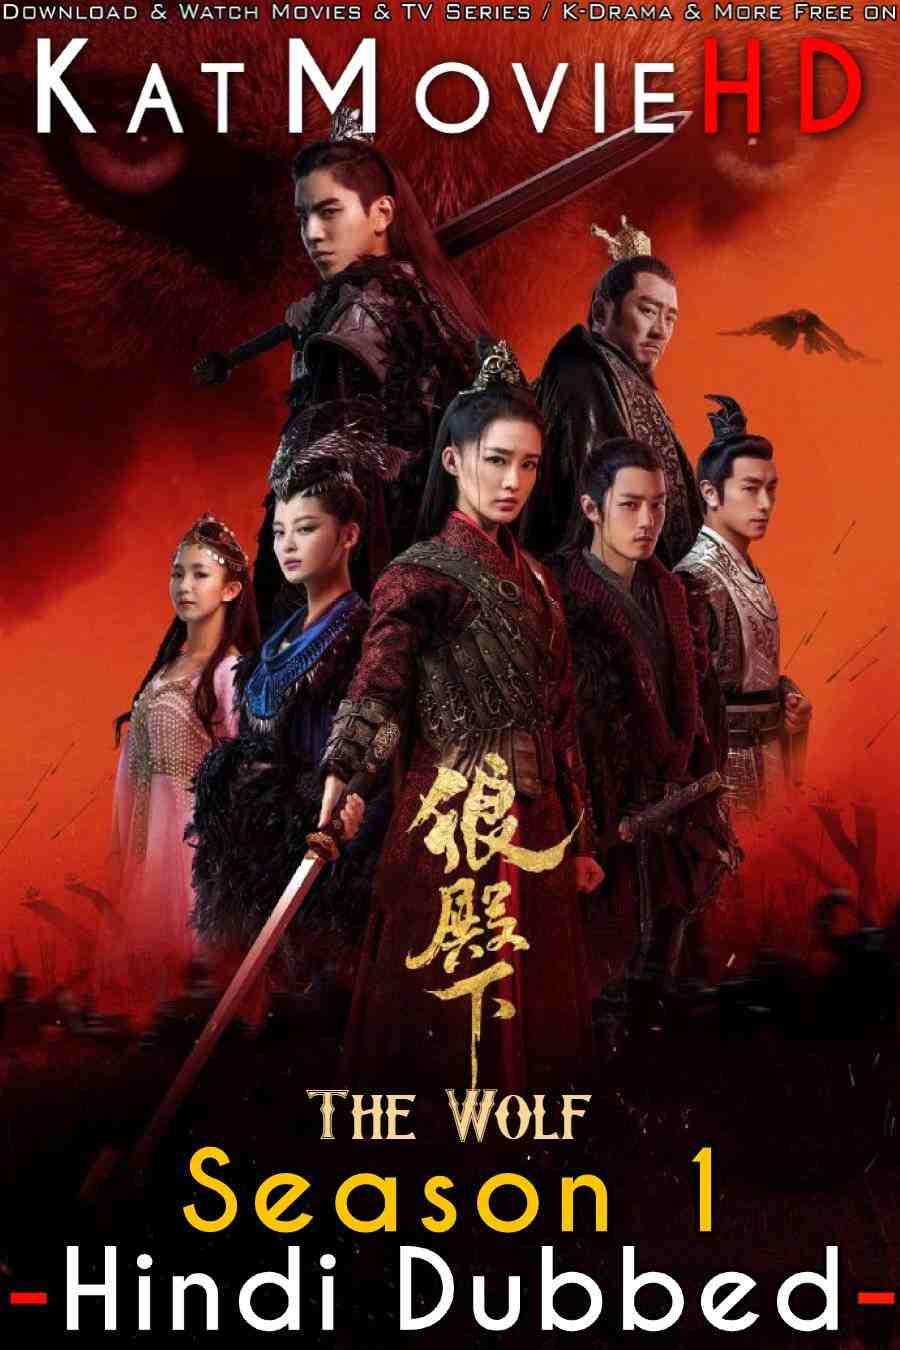 The Wolf (Season 1) Hindi Dubbed (ORG) WebRip 720p HD (2020 Chinese TV Series) [Episode 46-49 Added !]